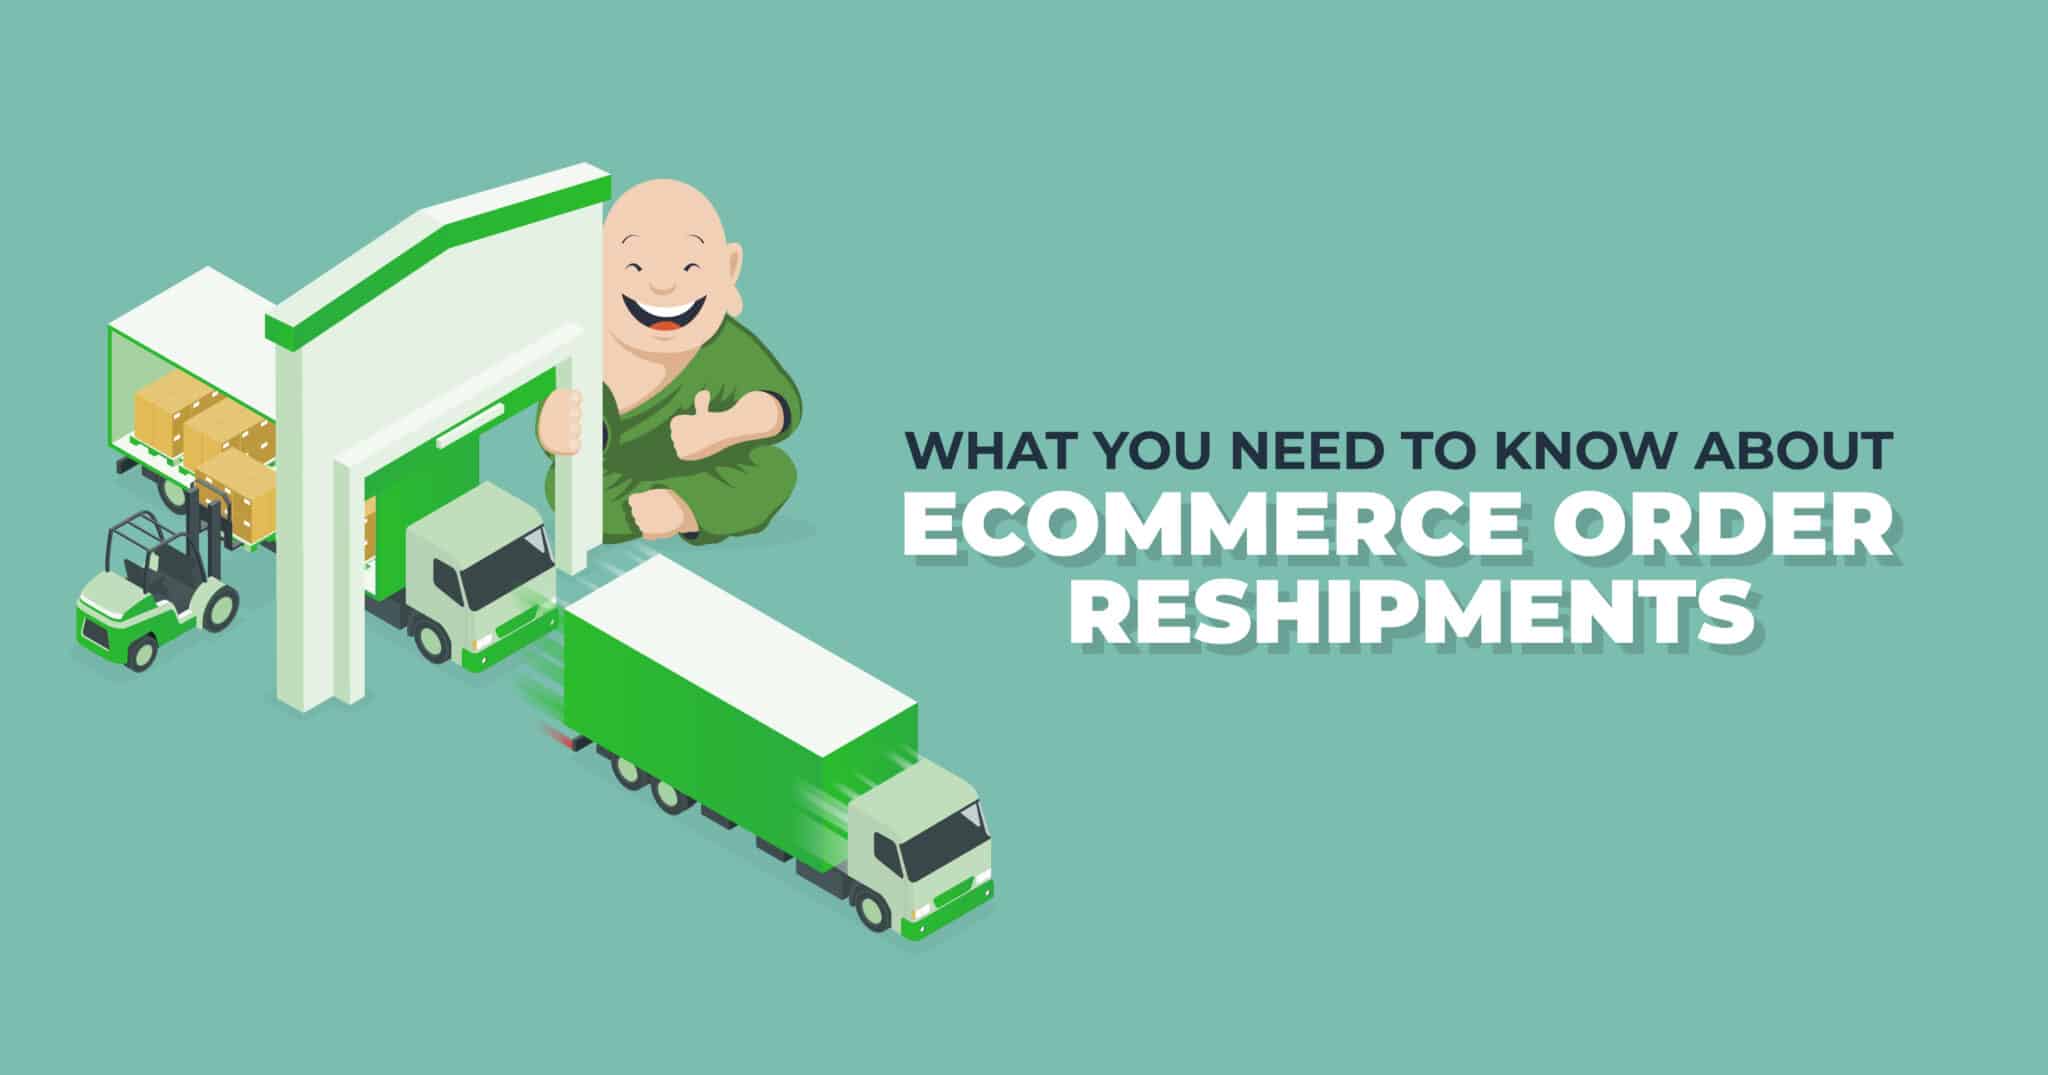 What you need to know about ecommerce order reshipments